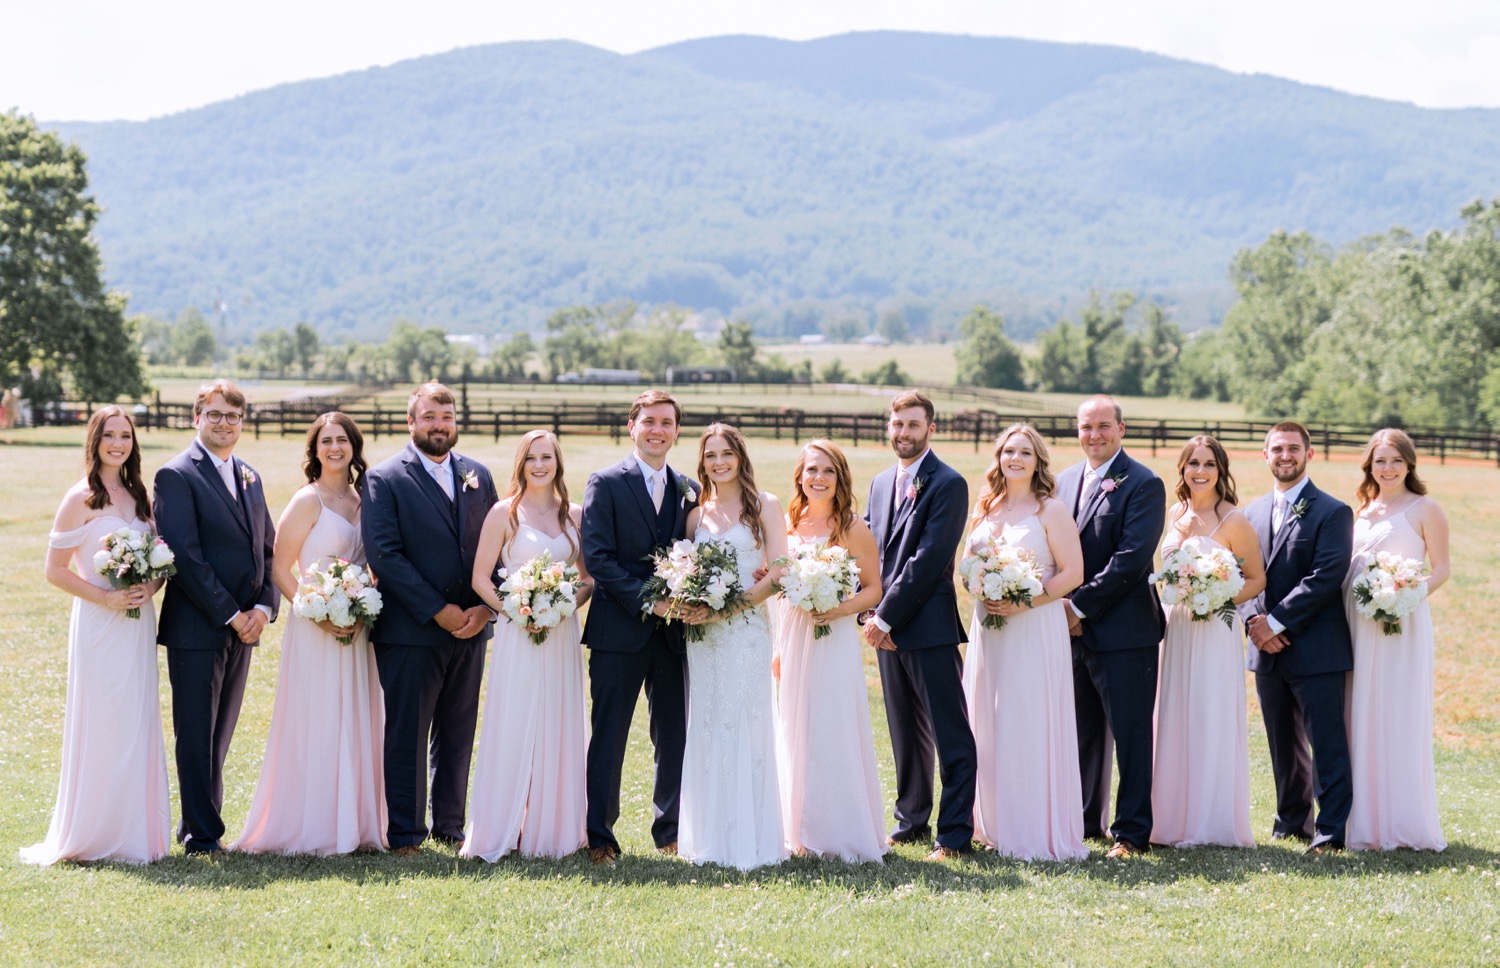 Entire wedding party before the ceremony in Charlottesville, VA